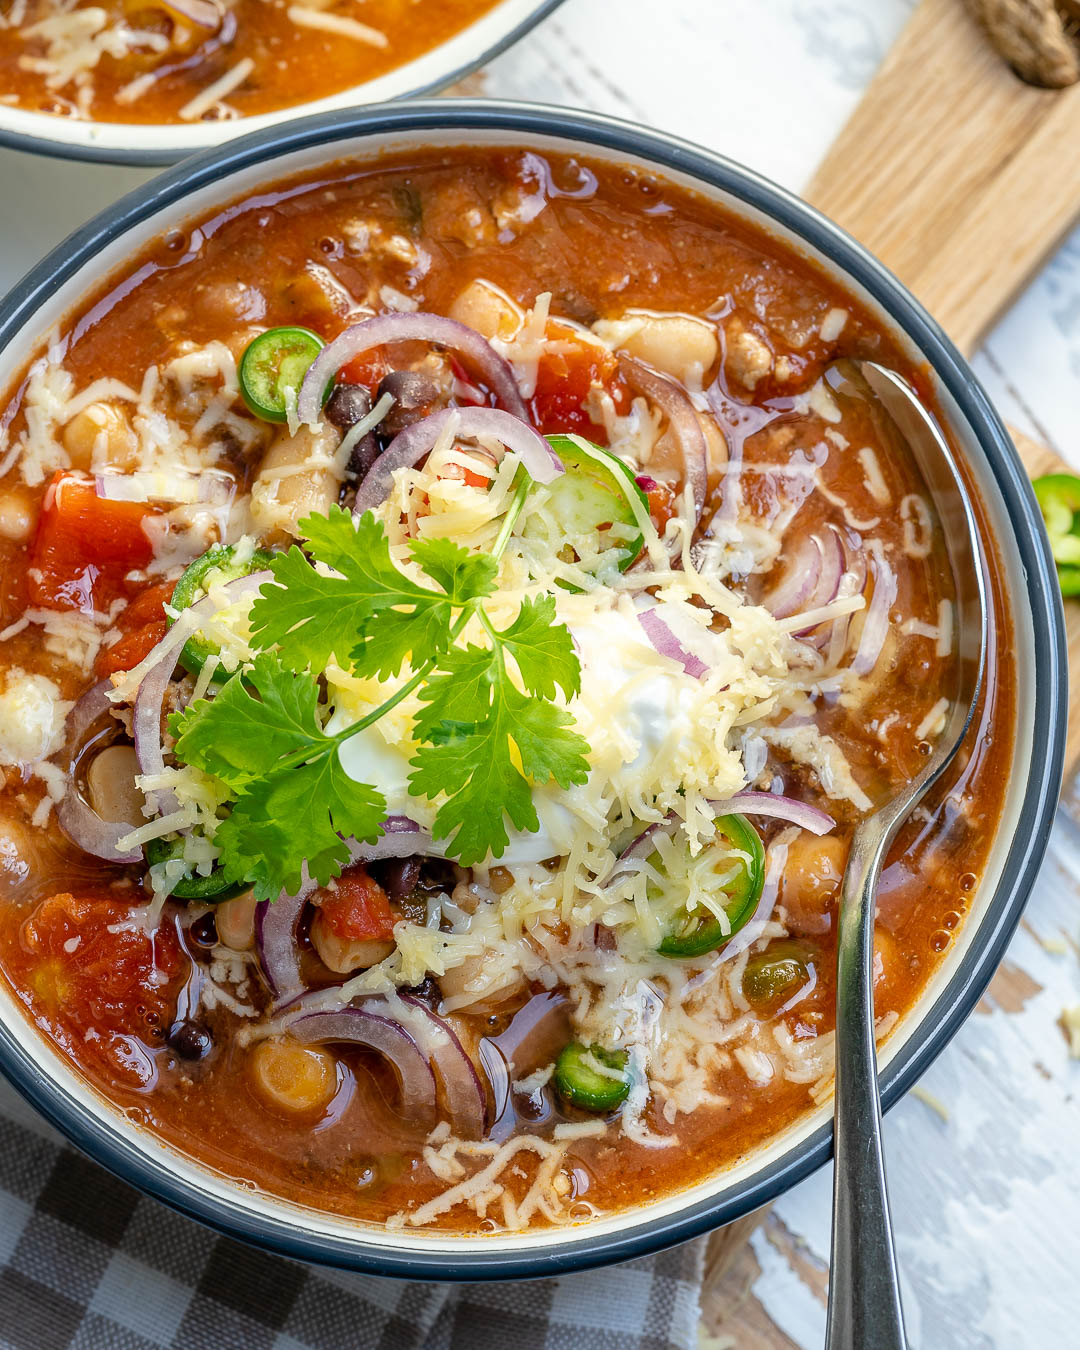 Flavorful 3-Bean Turkey Chili Meal